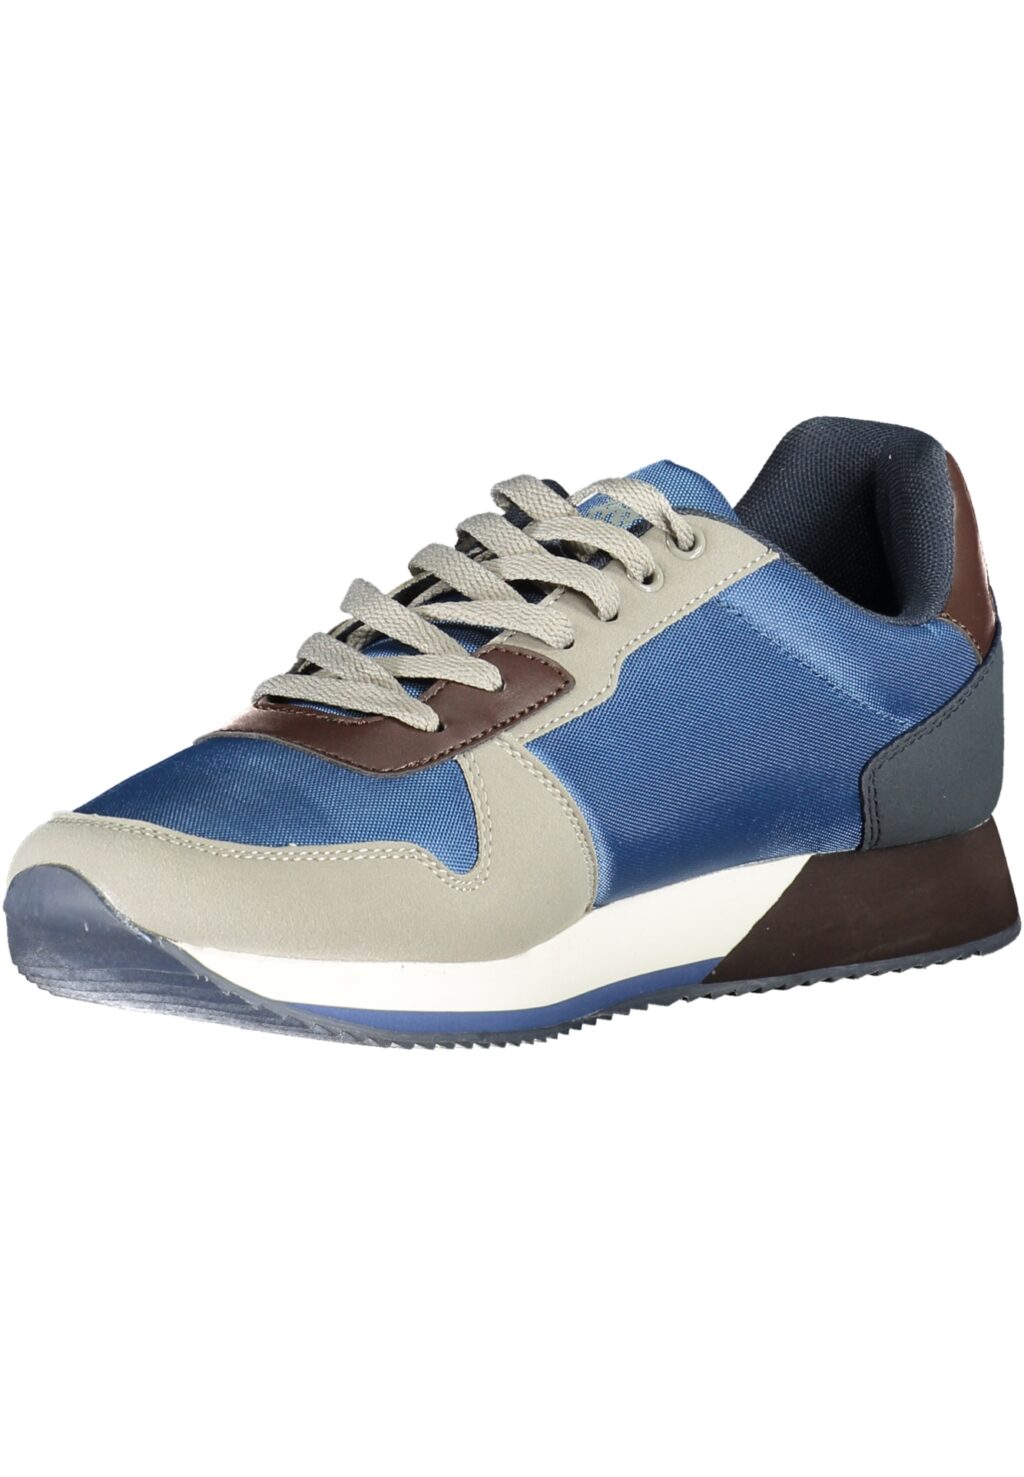 US POLO BEST PRICE BLUE MEN'S SPORTS SHOES NOBIL011MCNH1_BLBLUGRY02